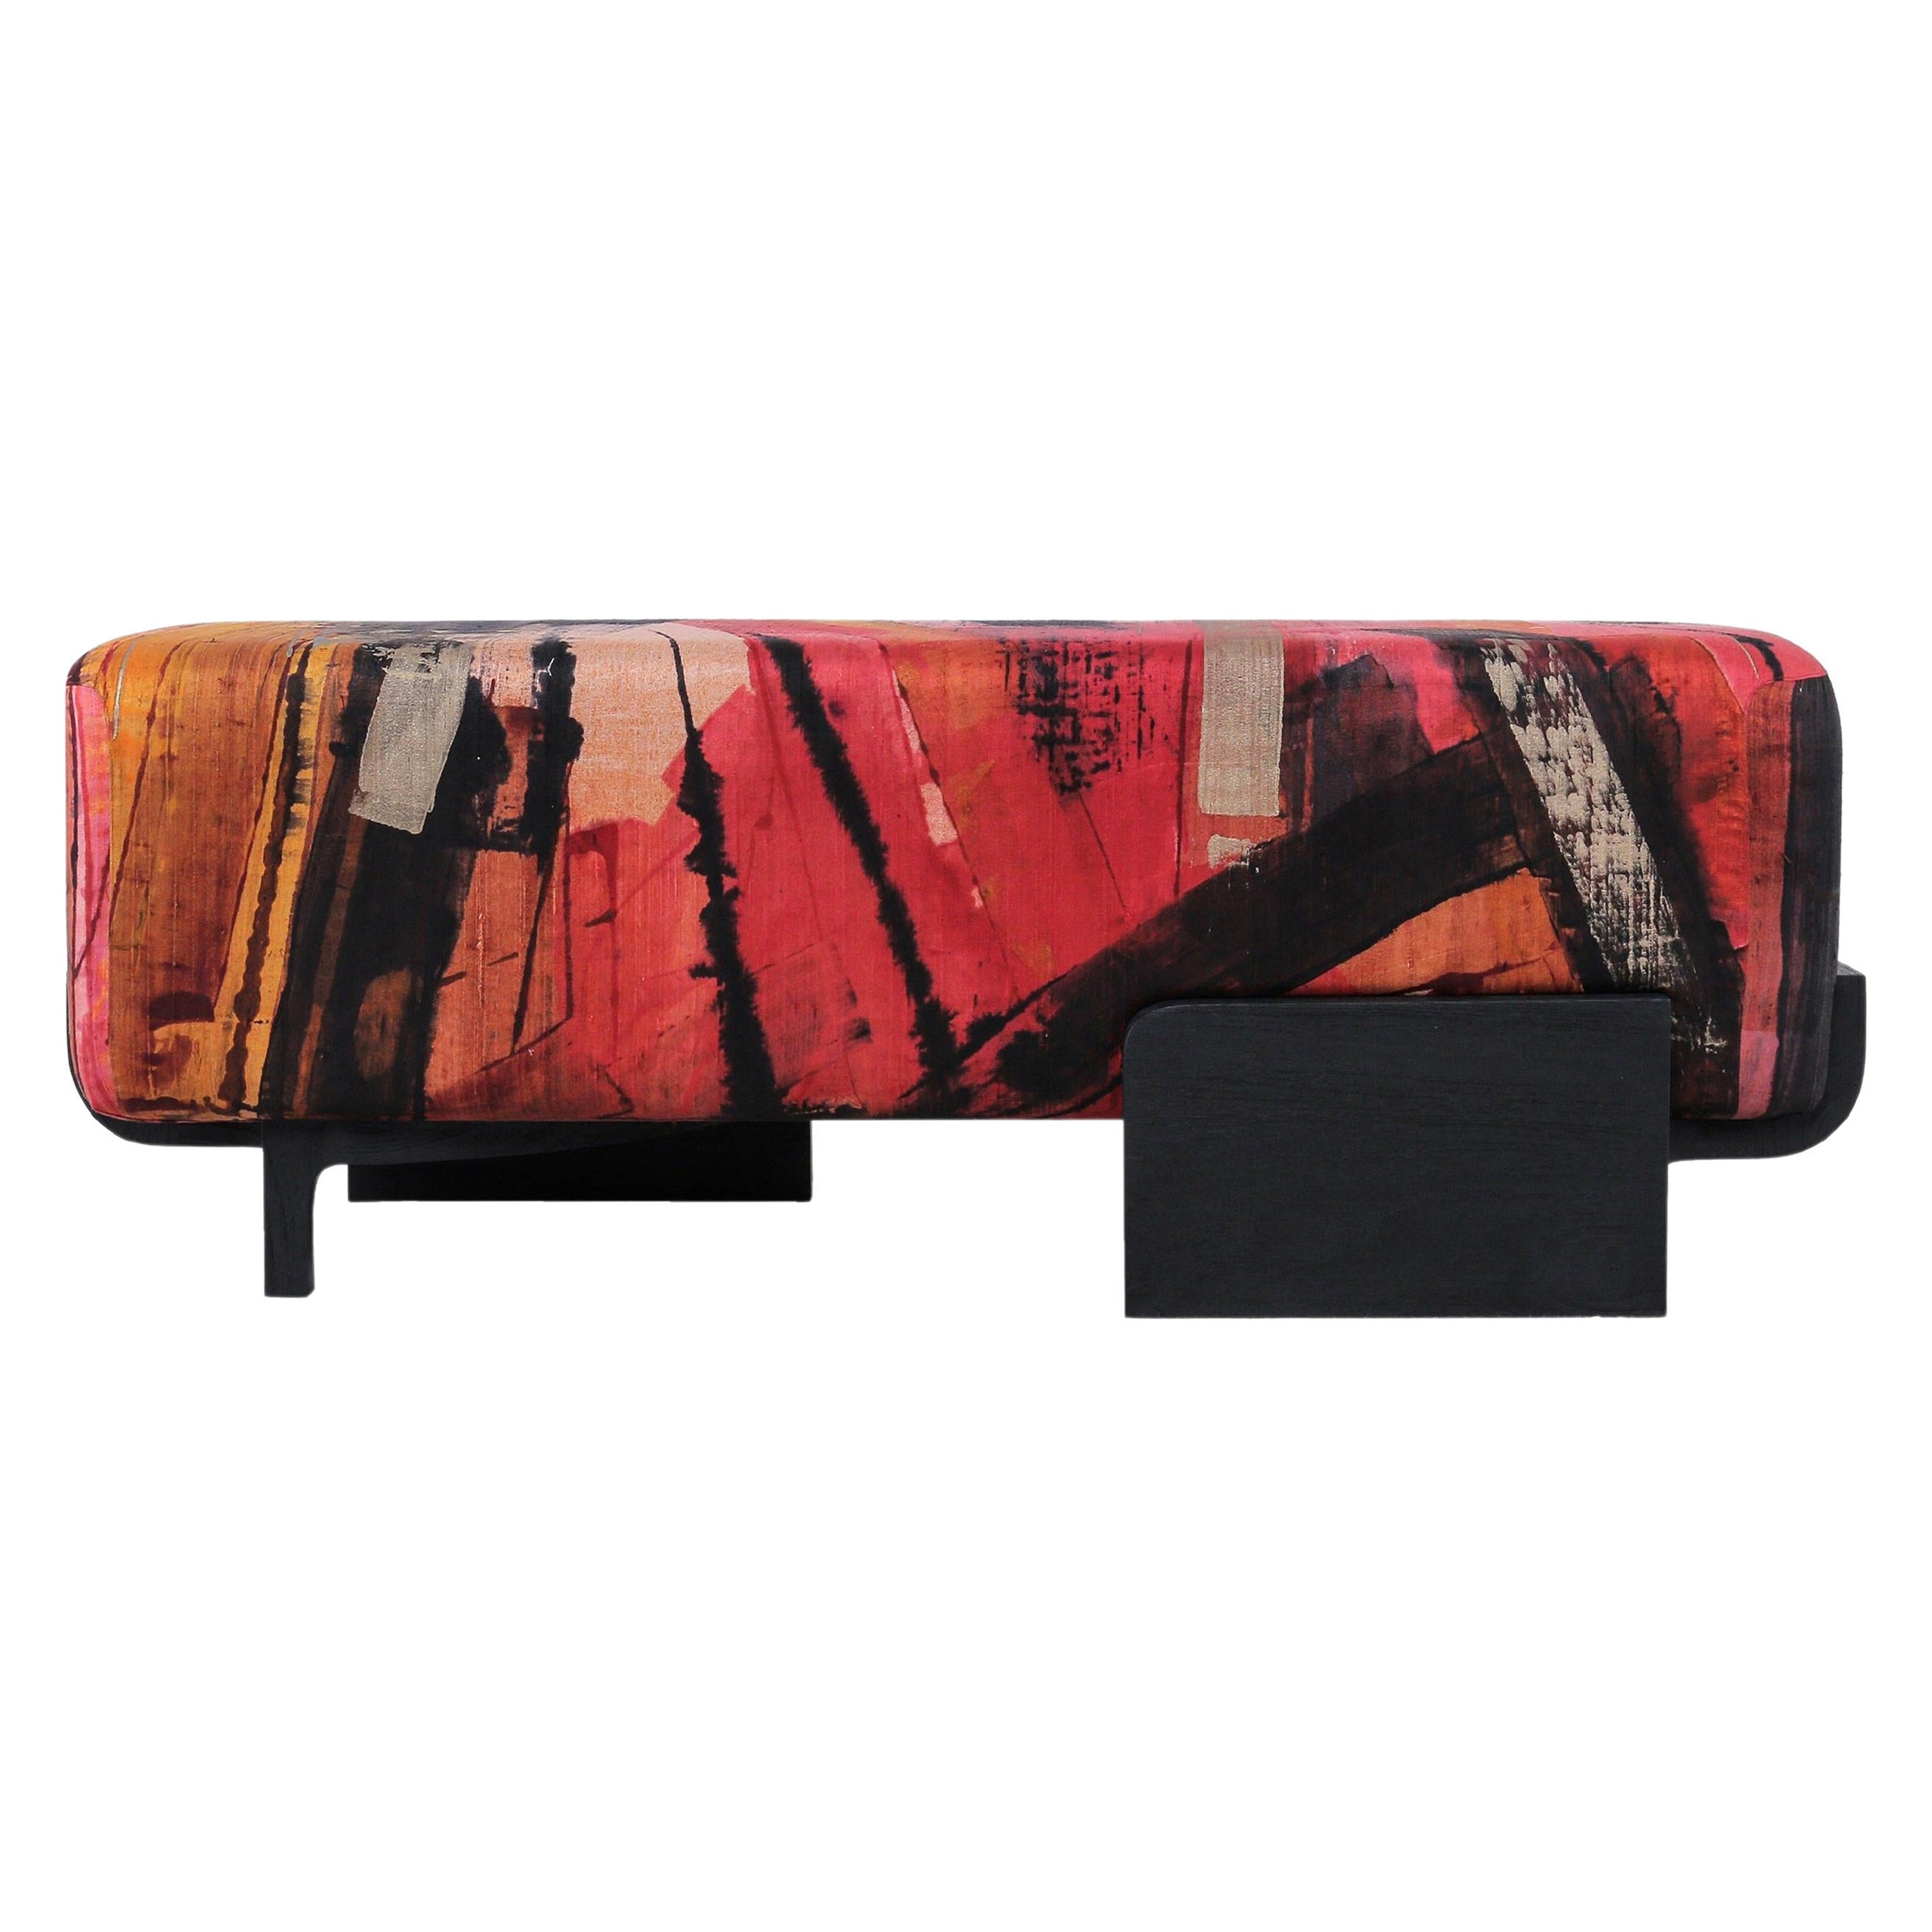 Admani Bench by Pendhapa For Sale